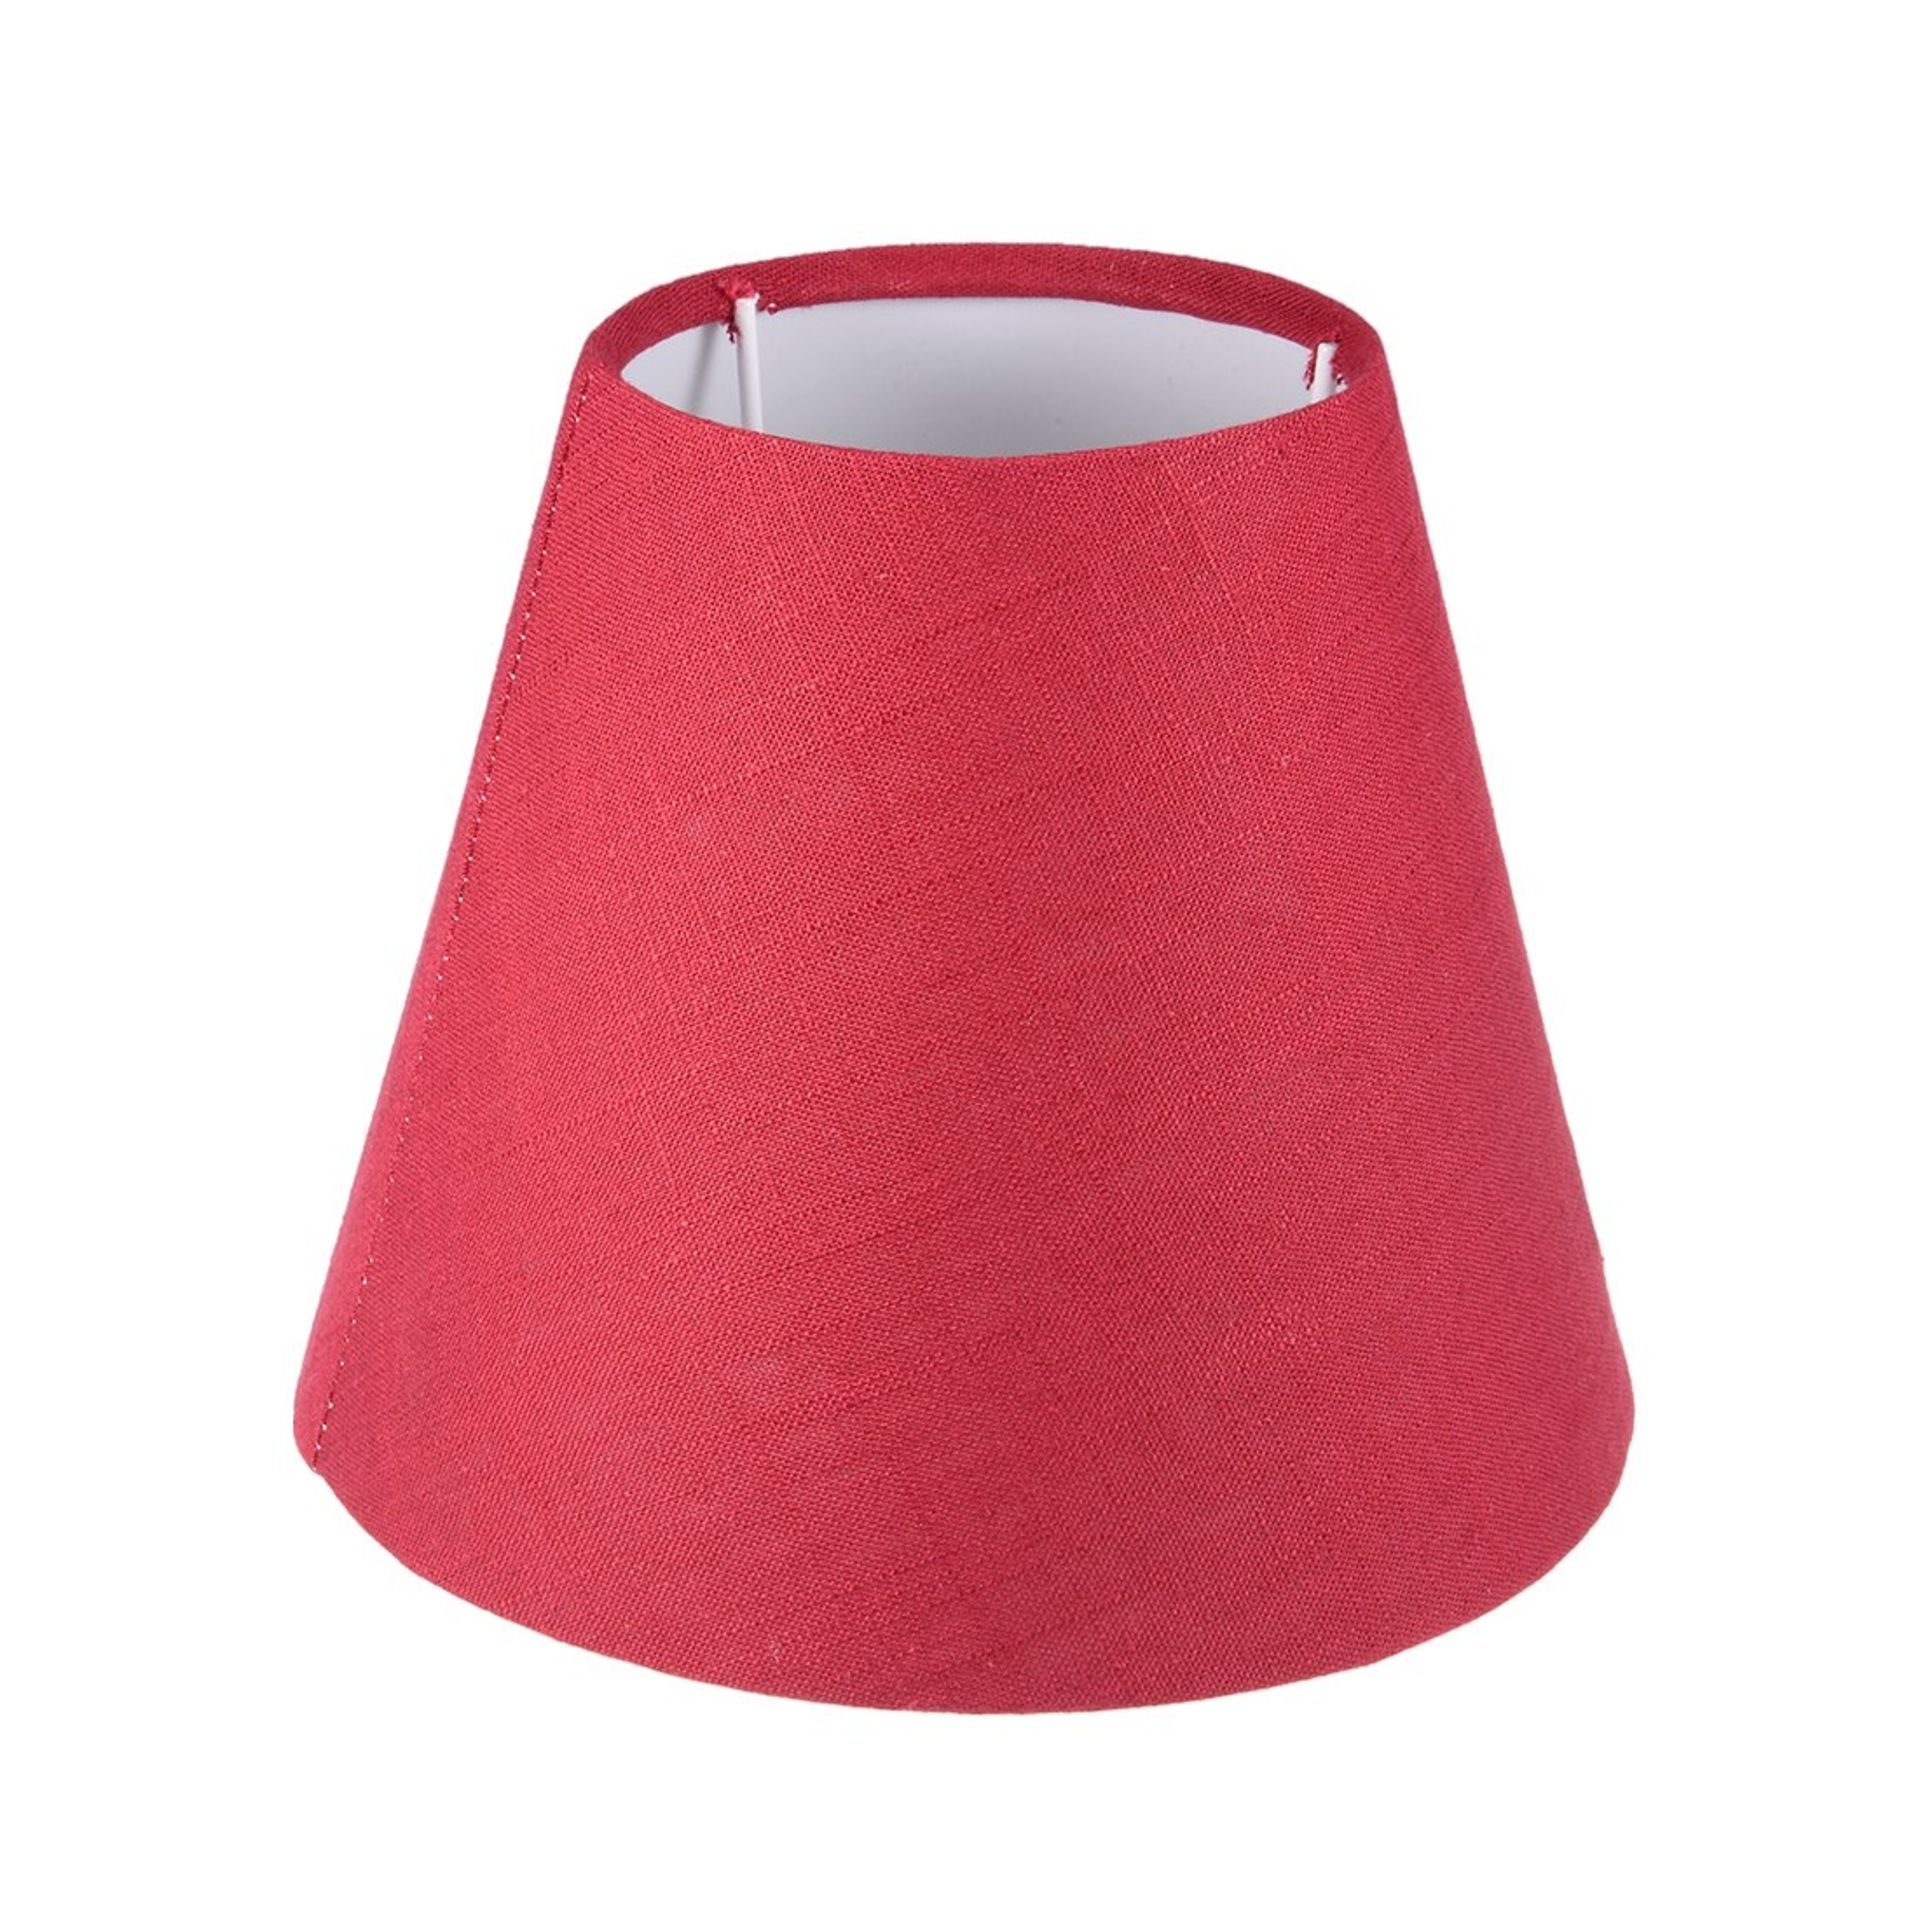 RRP £24.00 sourcingmap uxcellLampshades Floor Lamp Shade Light Cover 3.9x7.1x5.9 inch